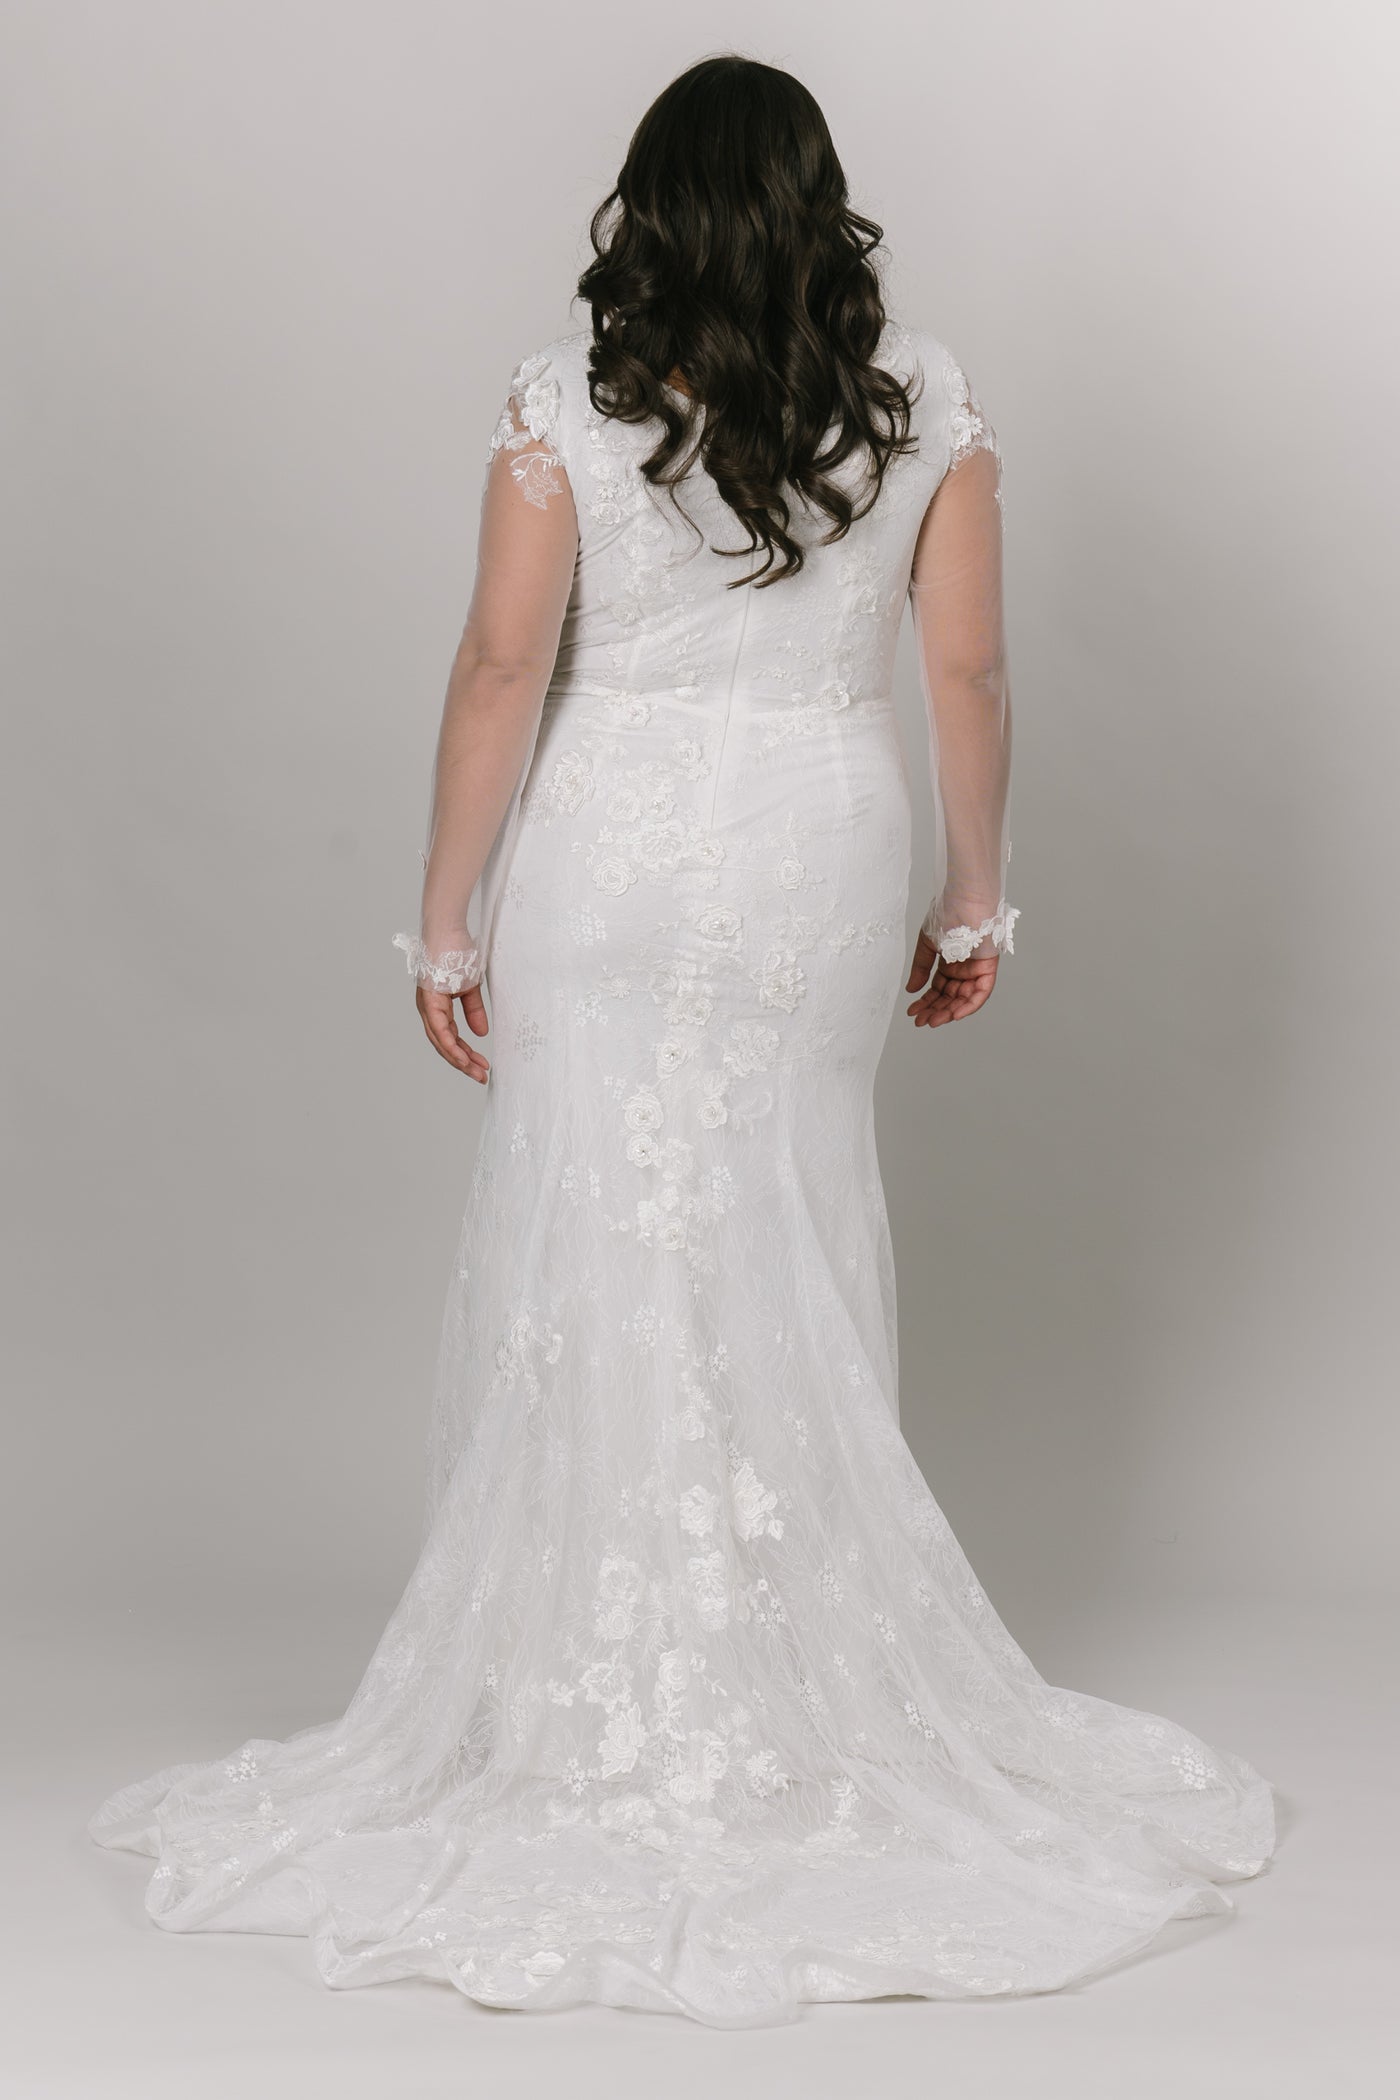 The back view of the wedding dress with a seamless zipper with illusions sleeves with a small train.